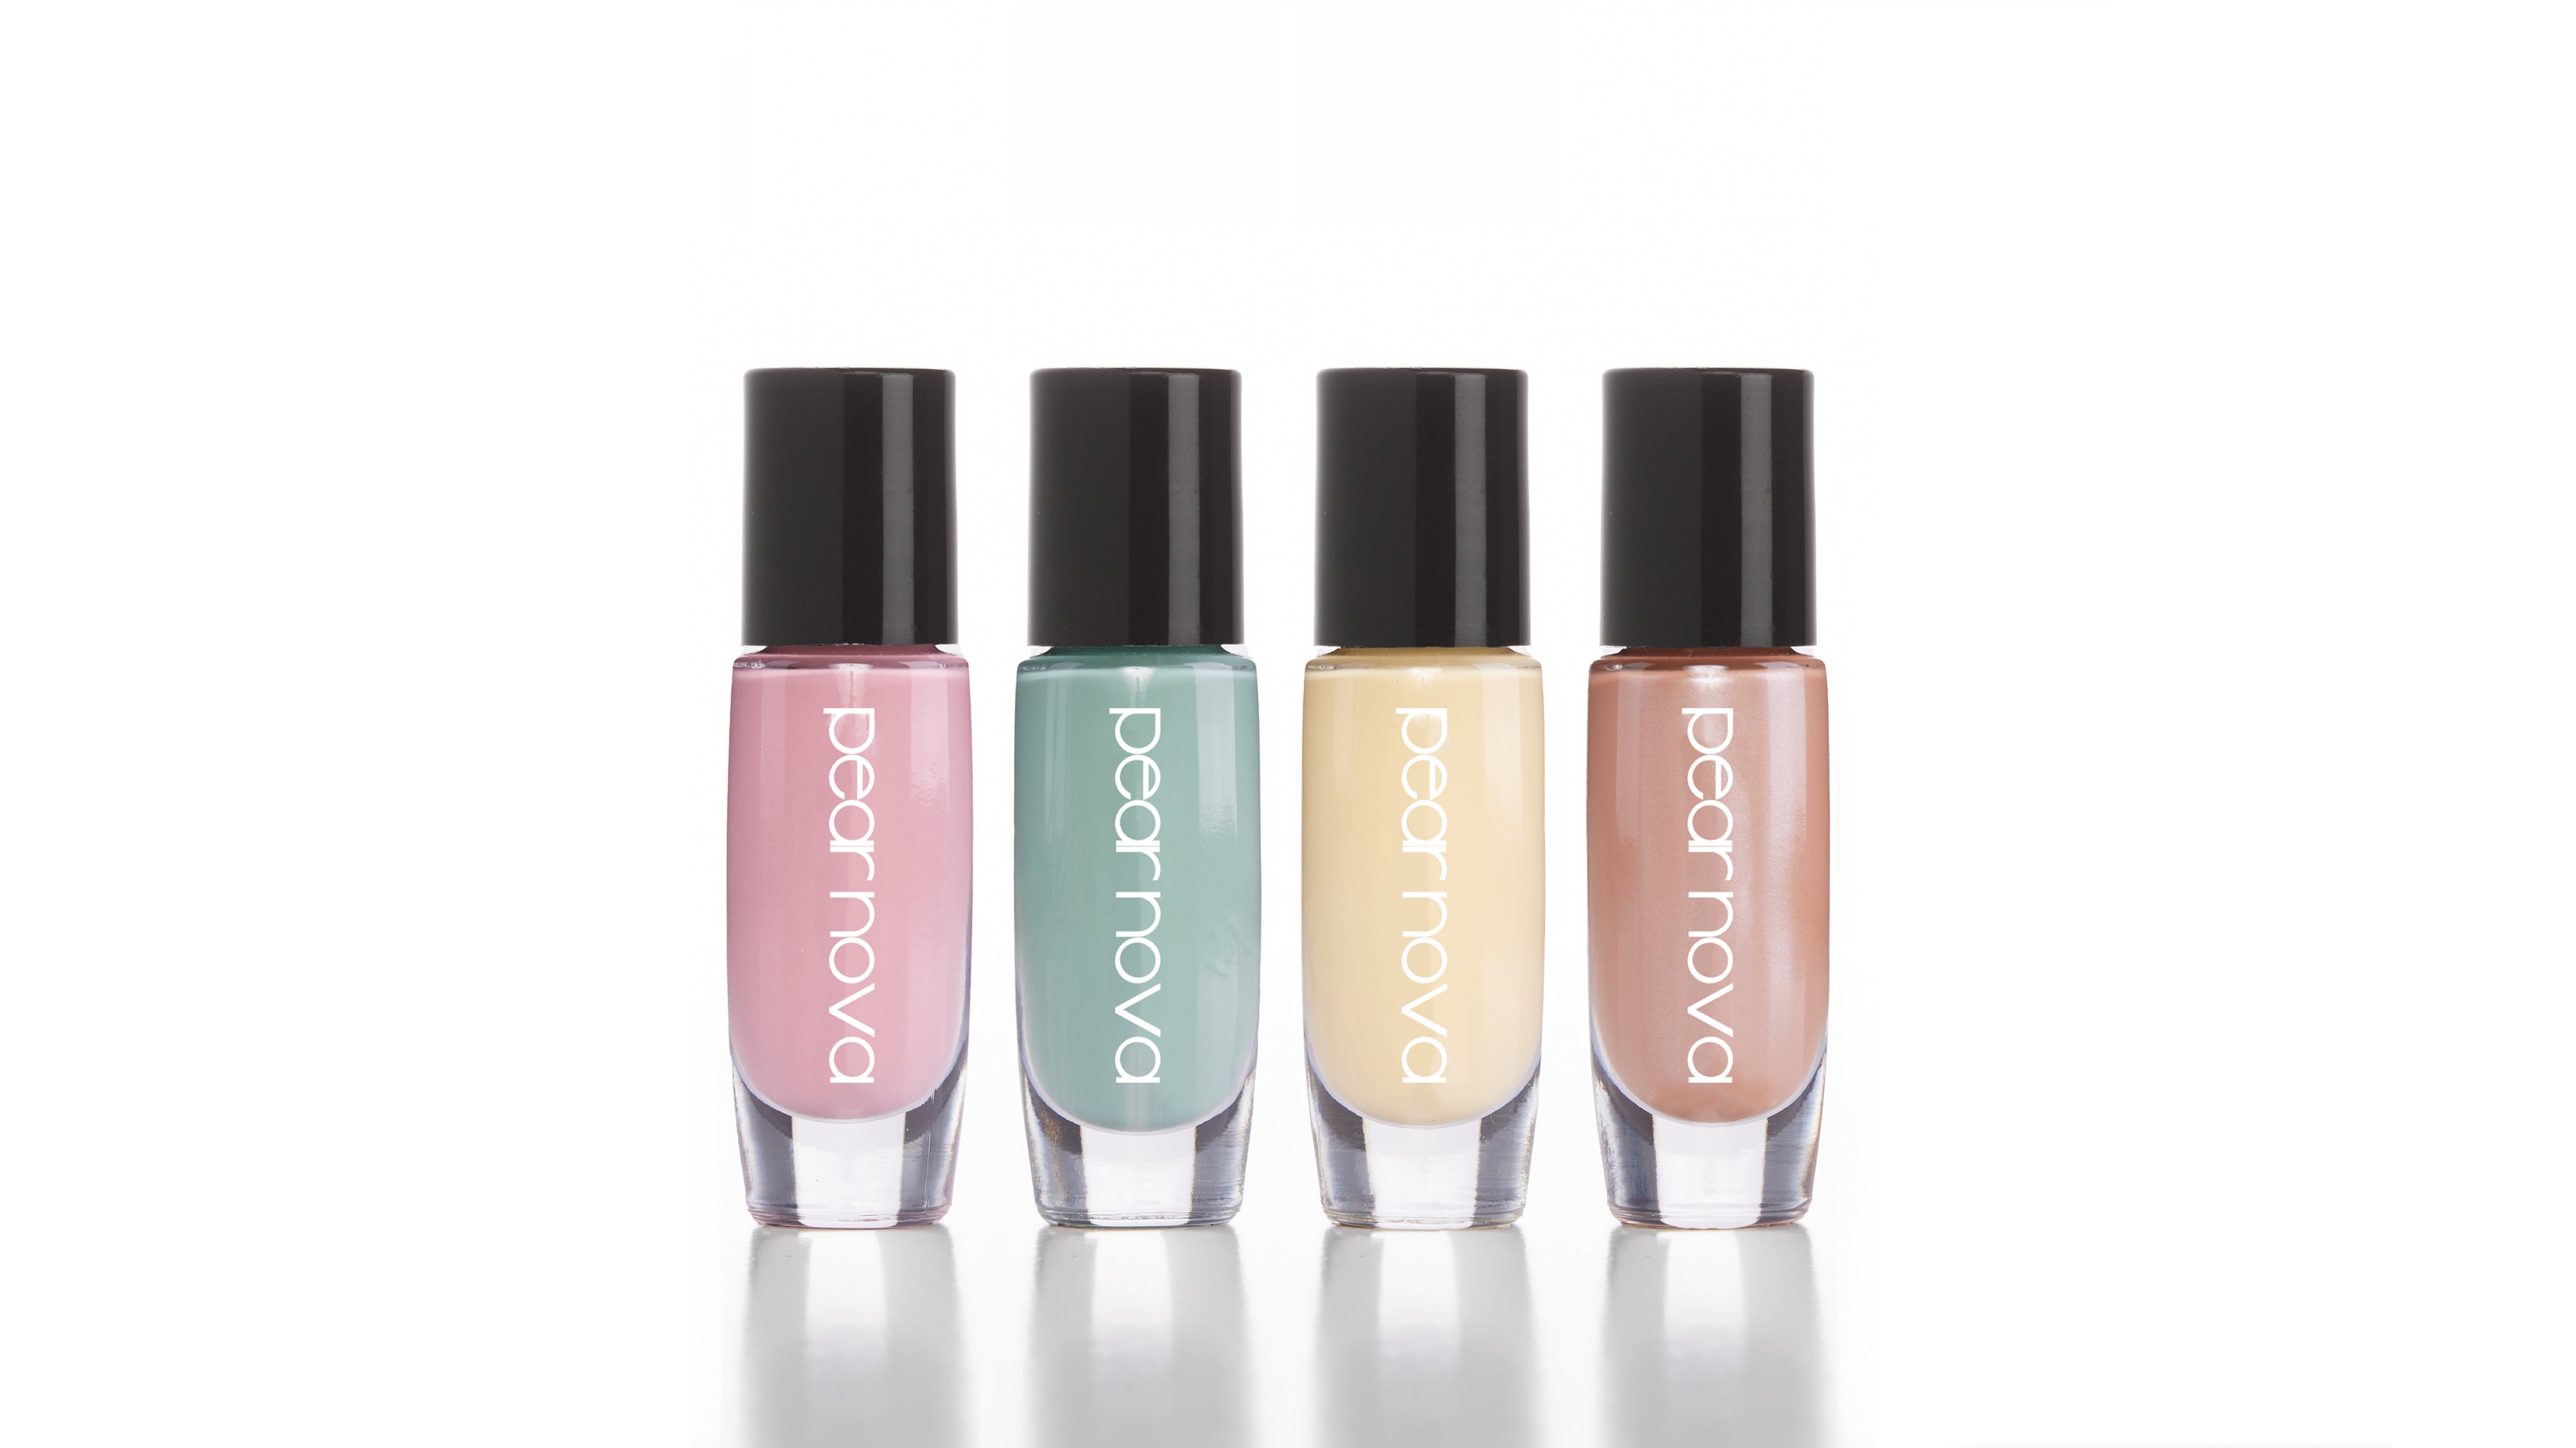 Spring into Freshness with Pear Nova's Newest Nail Colors!